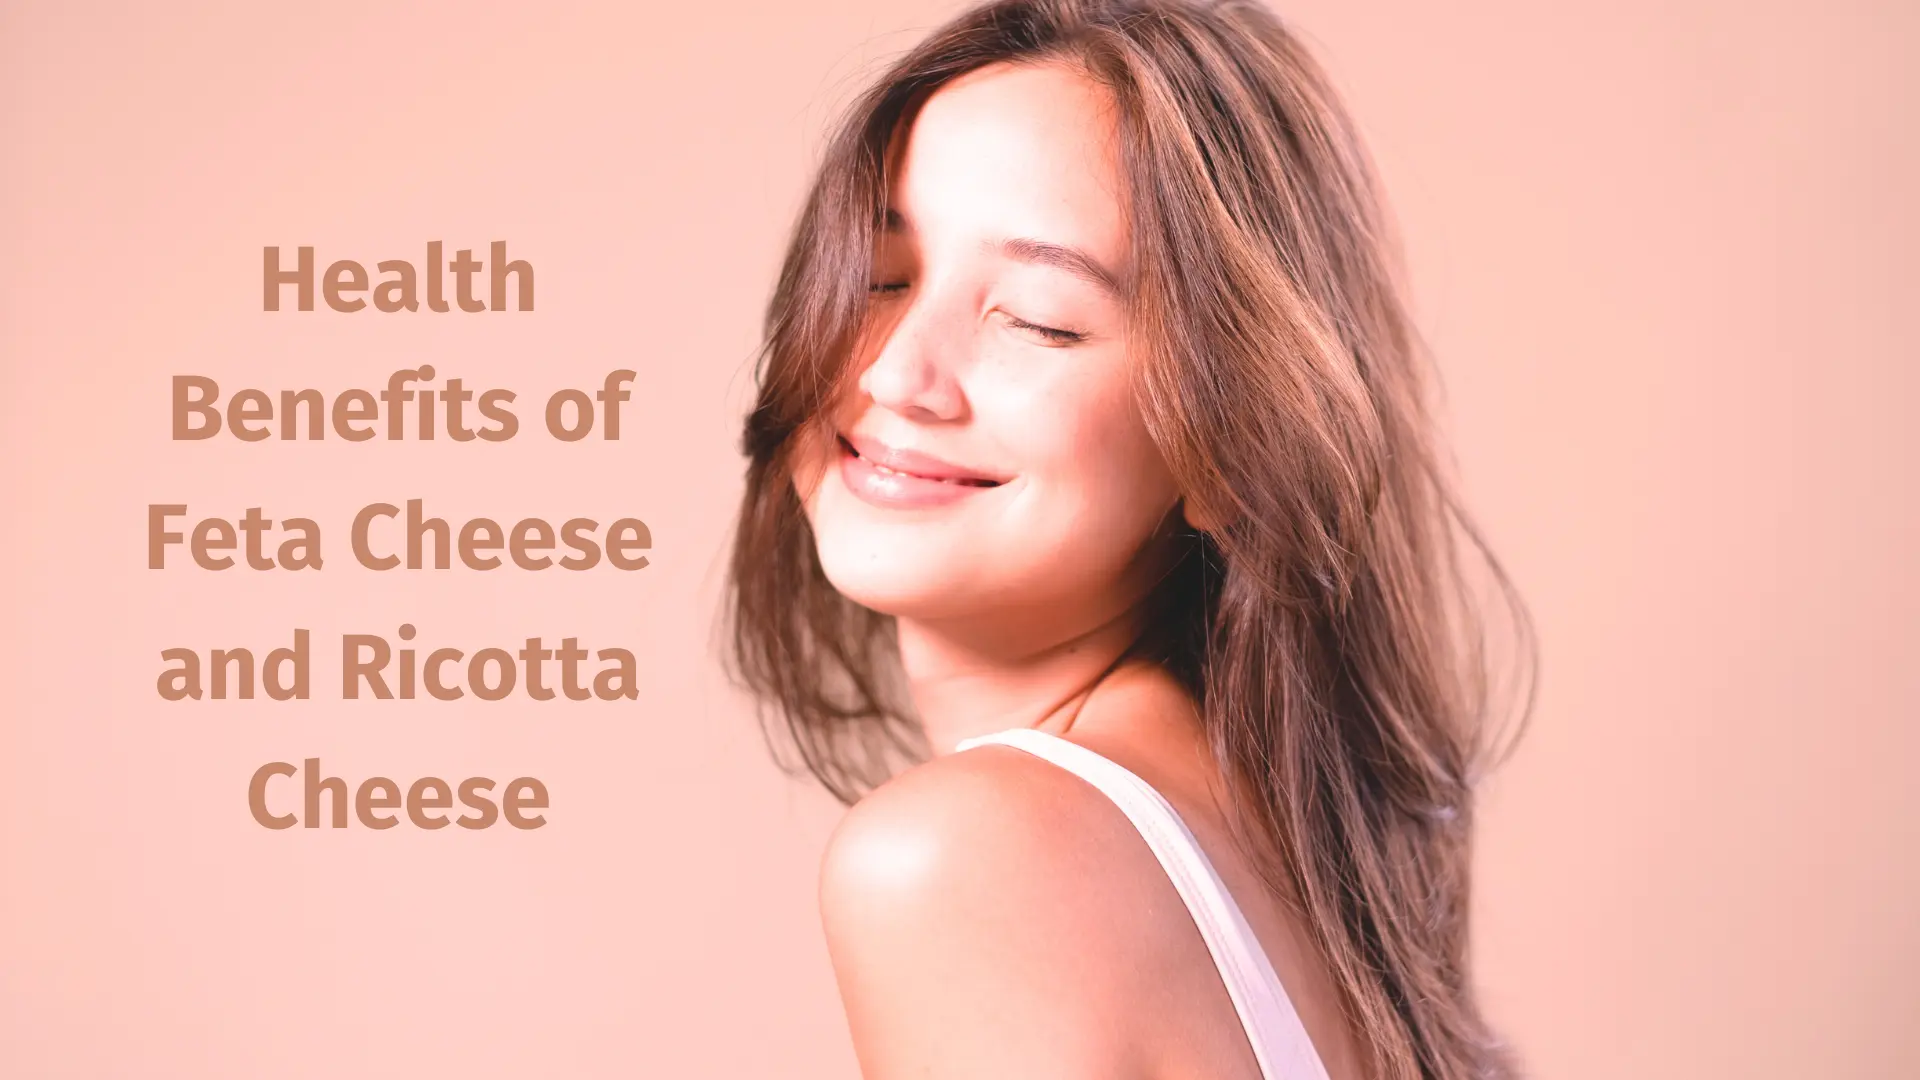 Health-Benefits-of-Feta-Cheese-and-Ricotta-Cheese